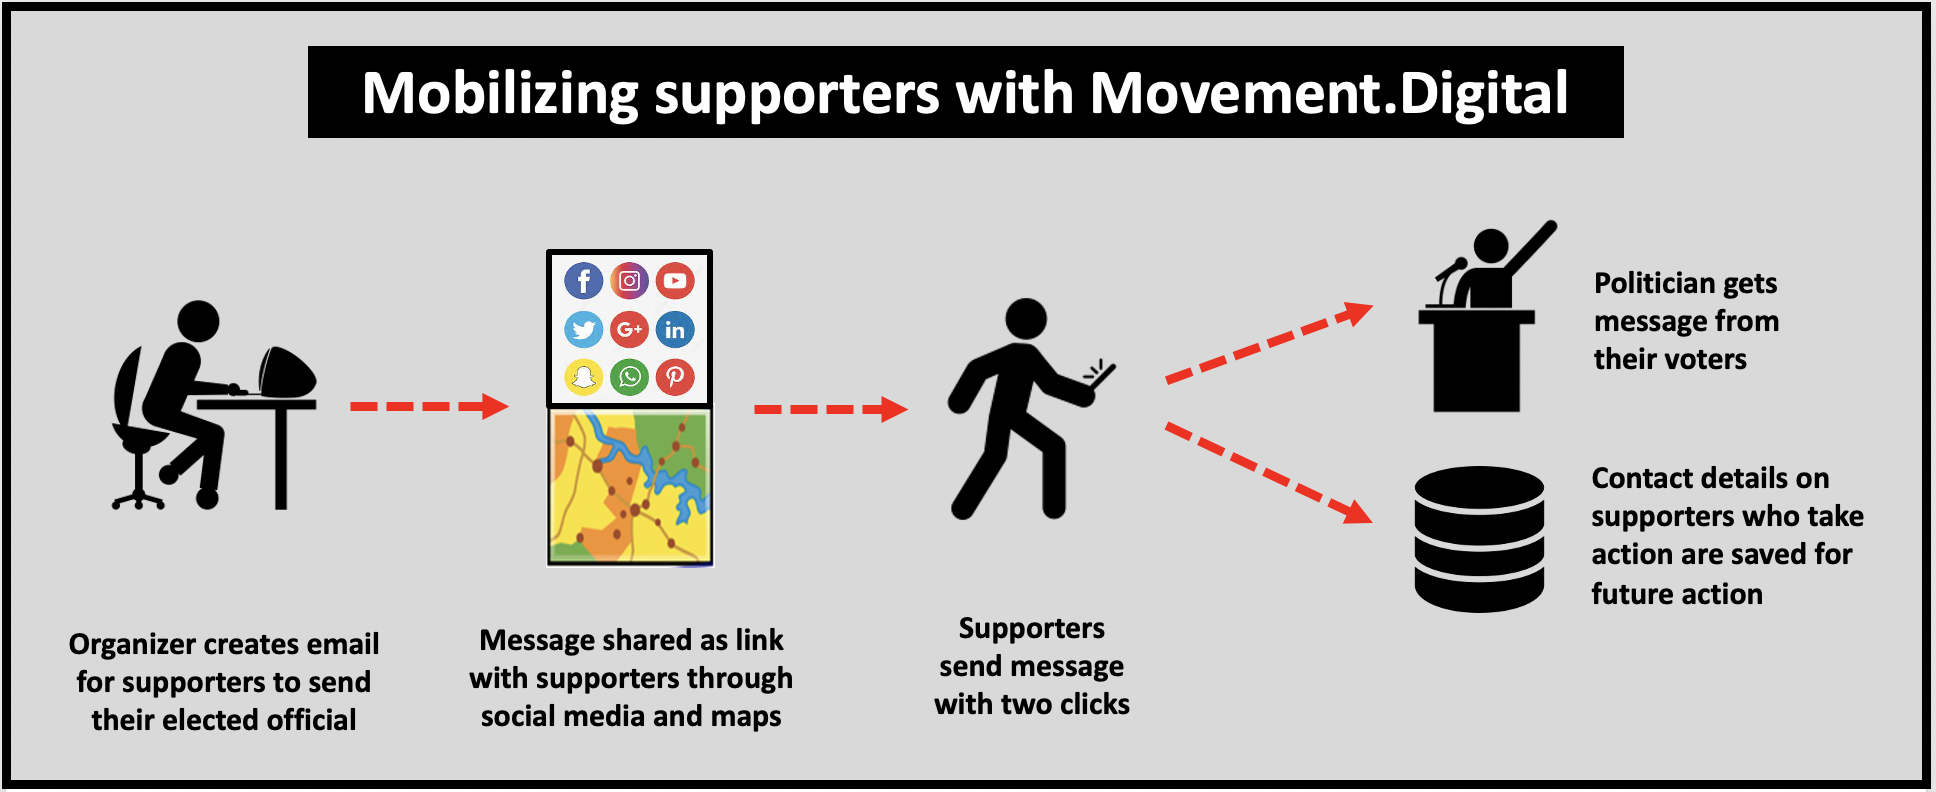 Mobilize supporters to contact their elected officials with Movement.Digital